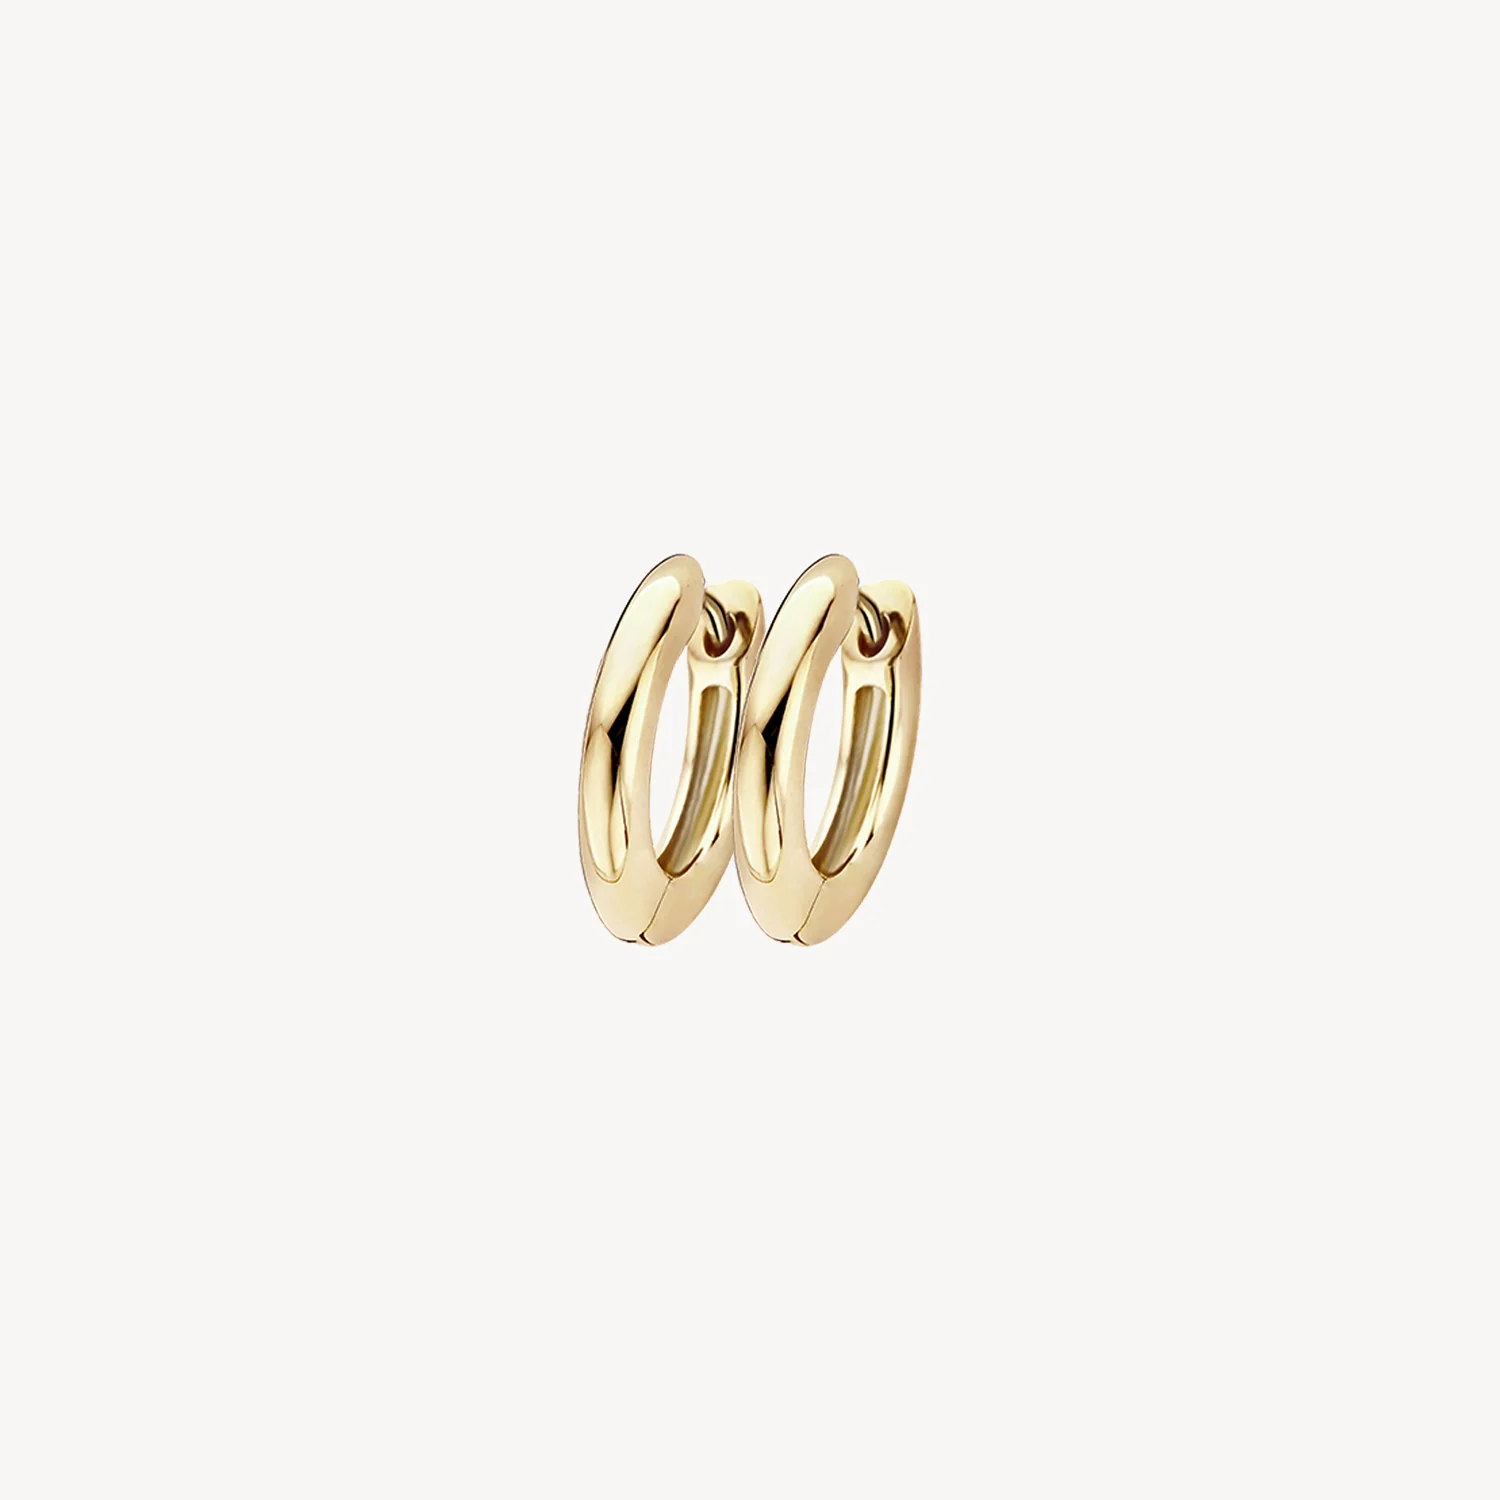 Blush Yellow Gold Hoop Earrings - Small 12mm